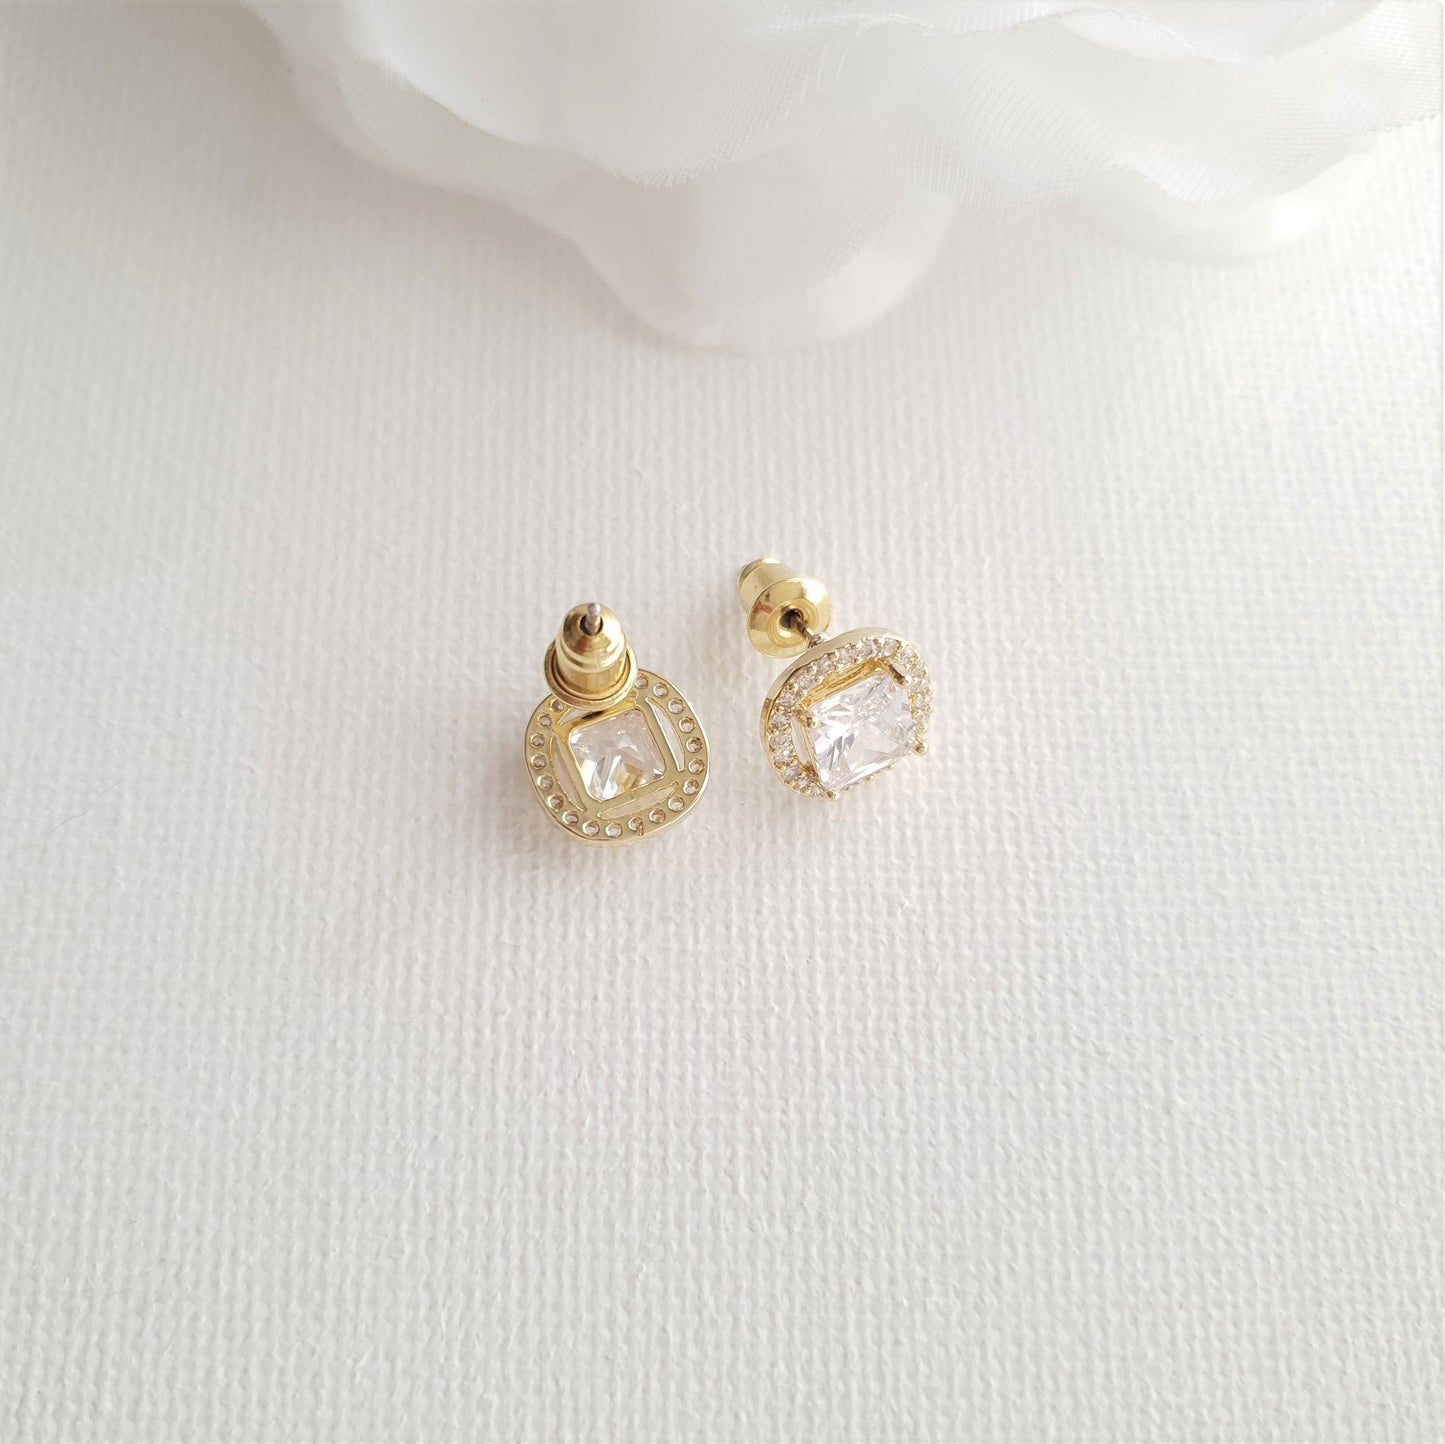 Stud Earrings for Bridesmaids Silver-Piper